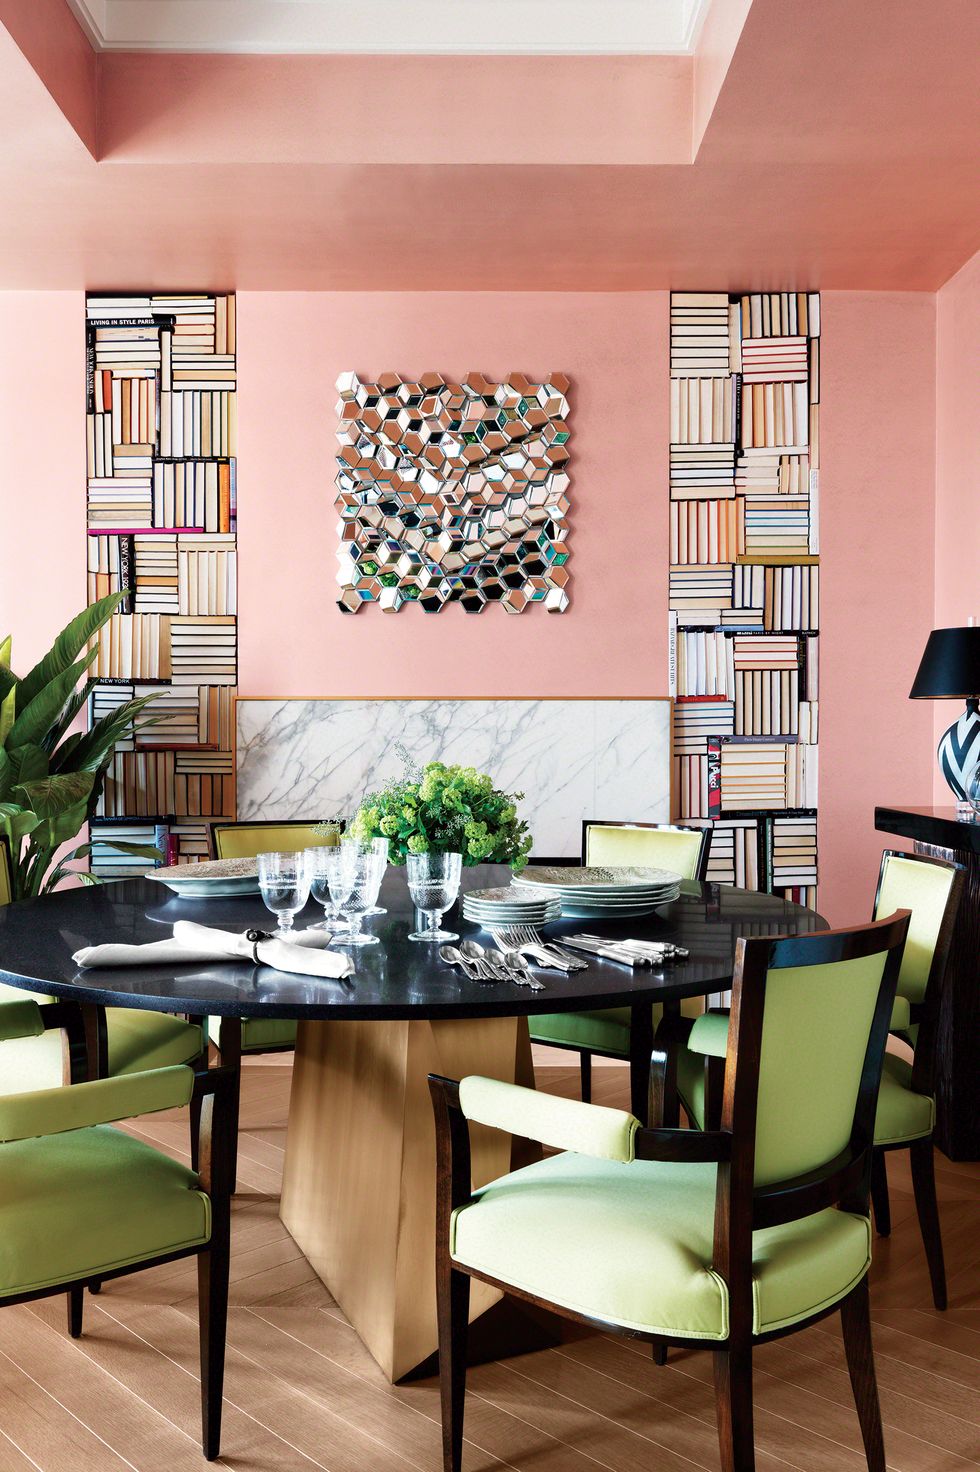 7 amazing Pink Interiors proving Pink is the Color Now